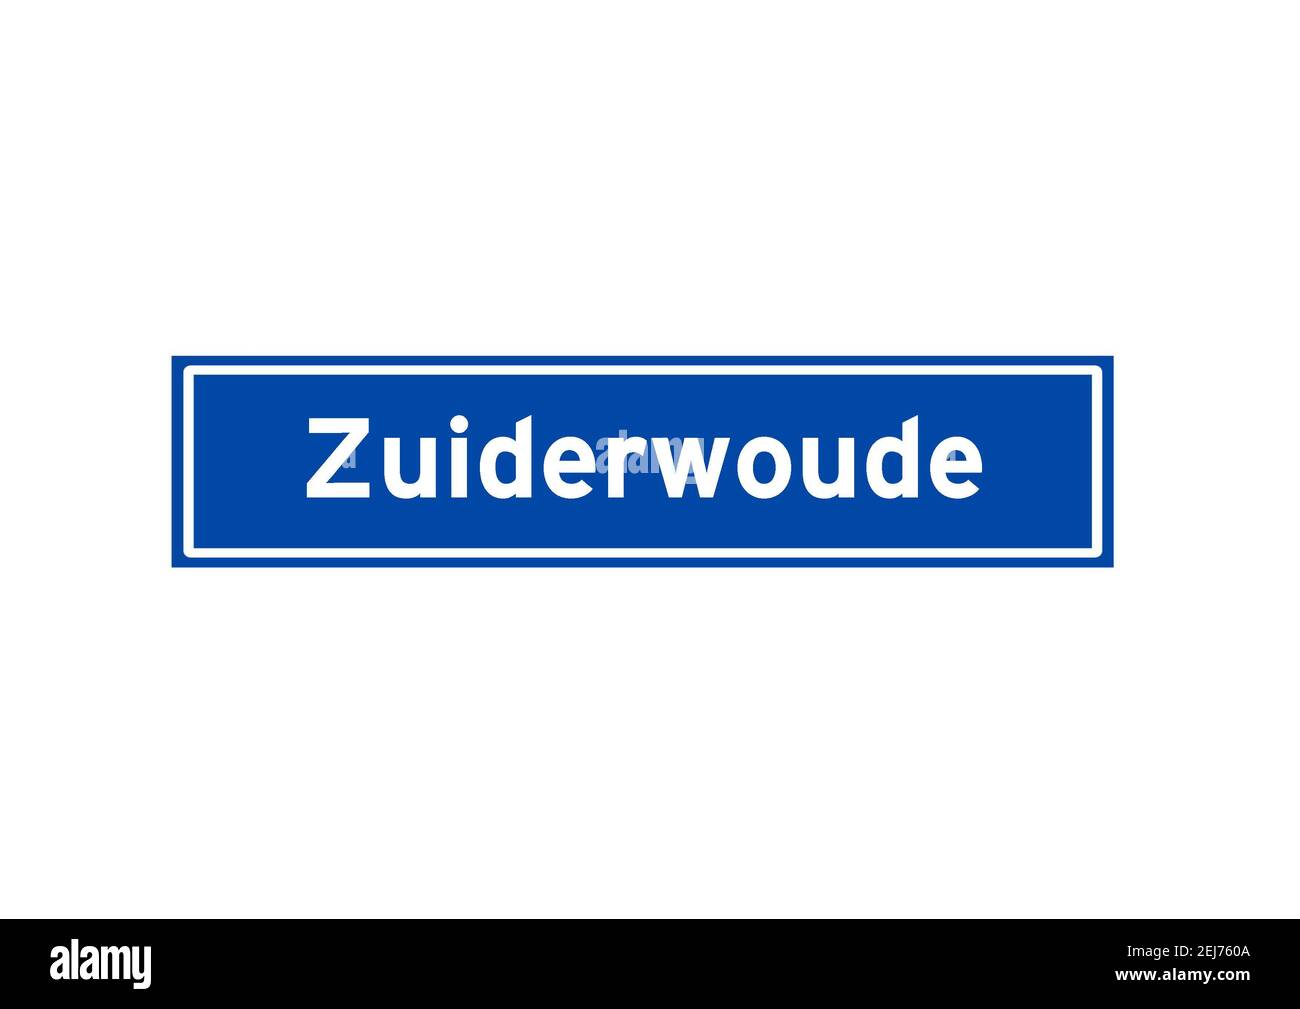 Zuiderwoude isolated Dutch place name sign. City sign from the Netherlands. Stock Photo